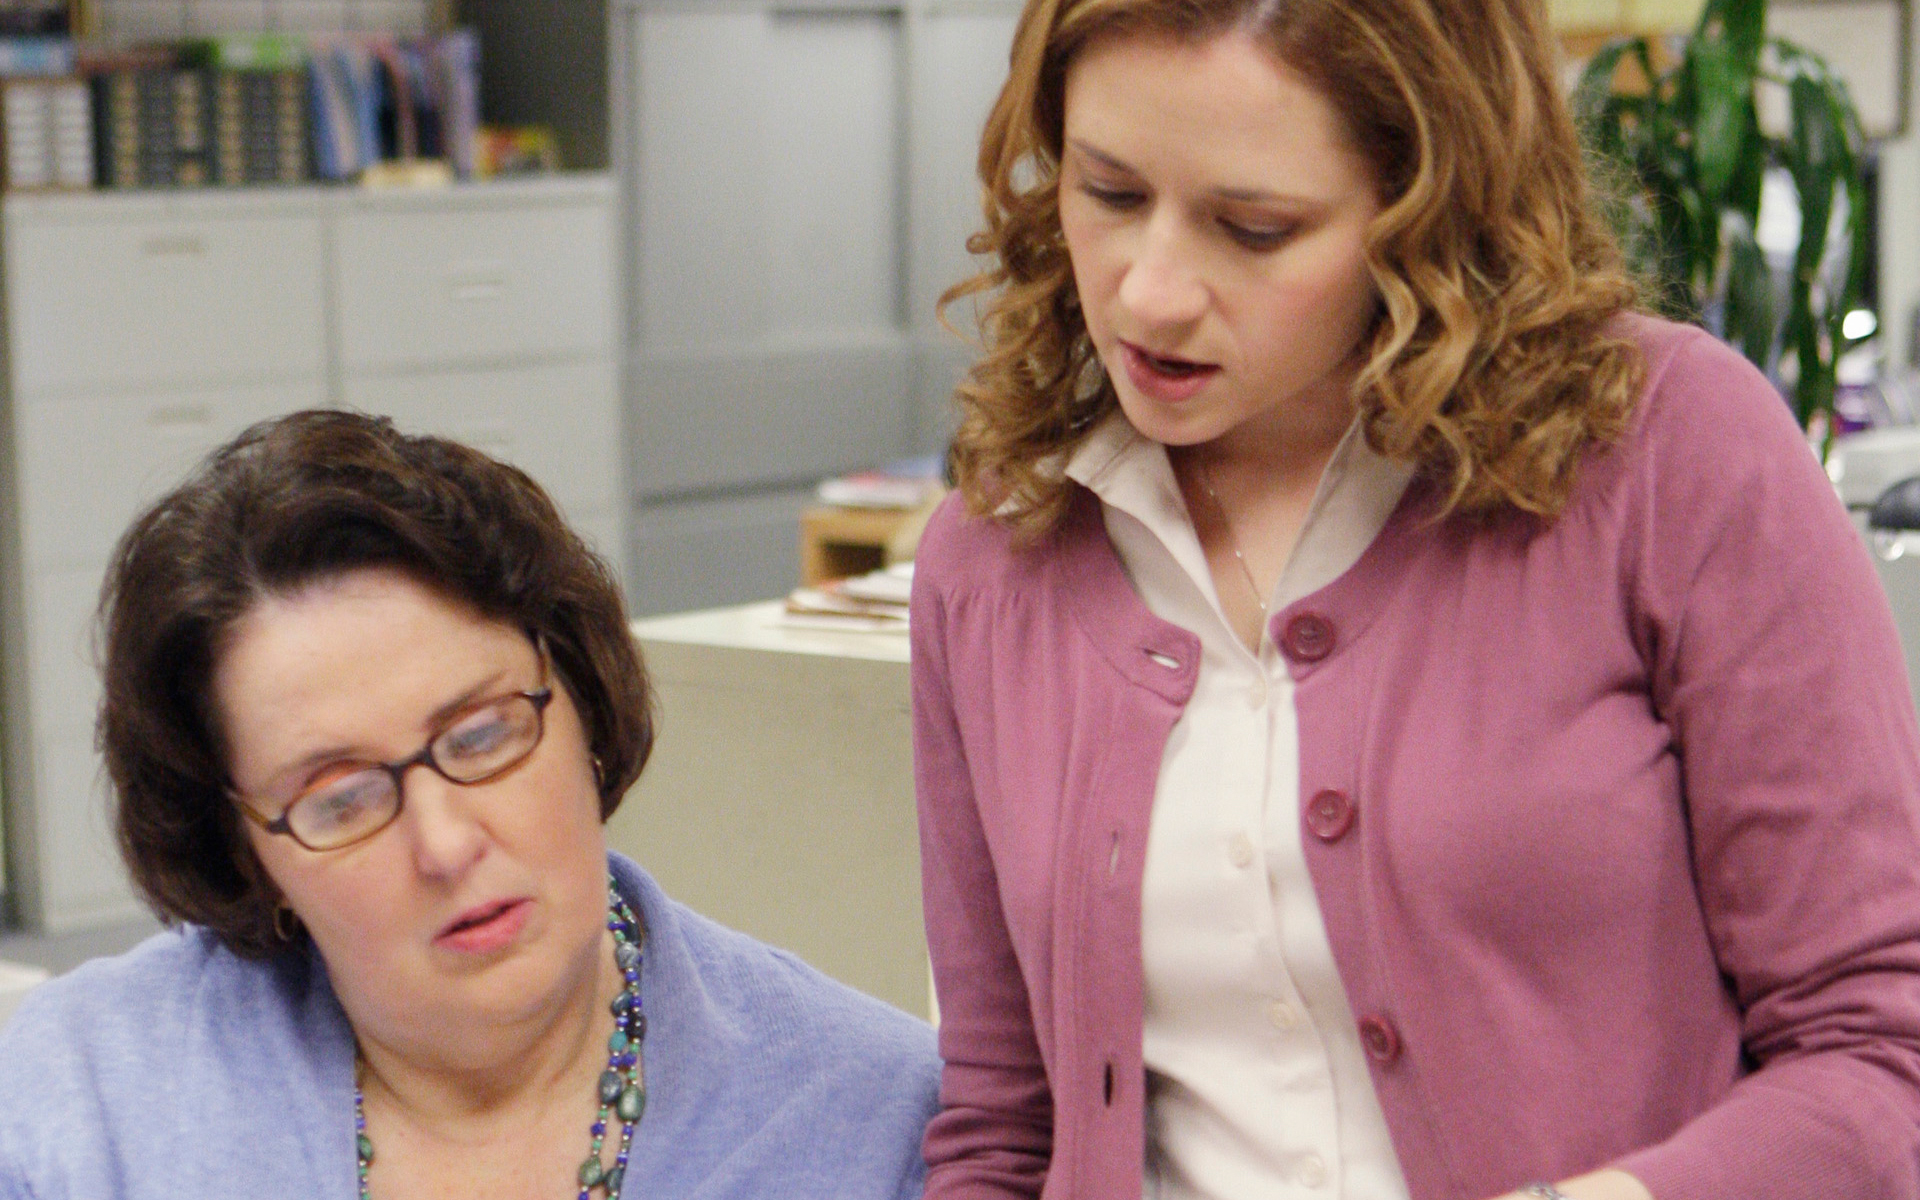 Phyllis Smith as Phyllis Lapin, Jenna Fischer as Pam Beesly on 'The Office'